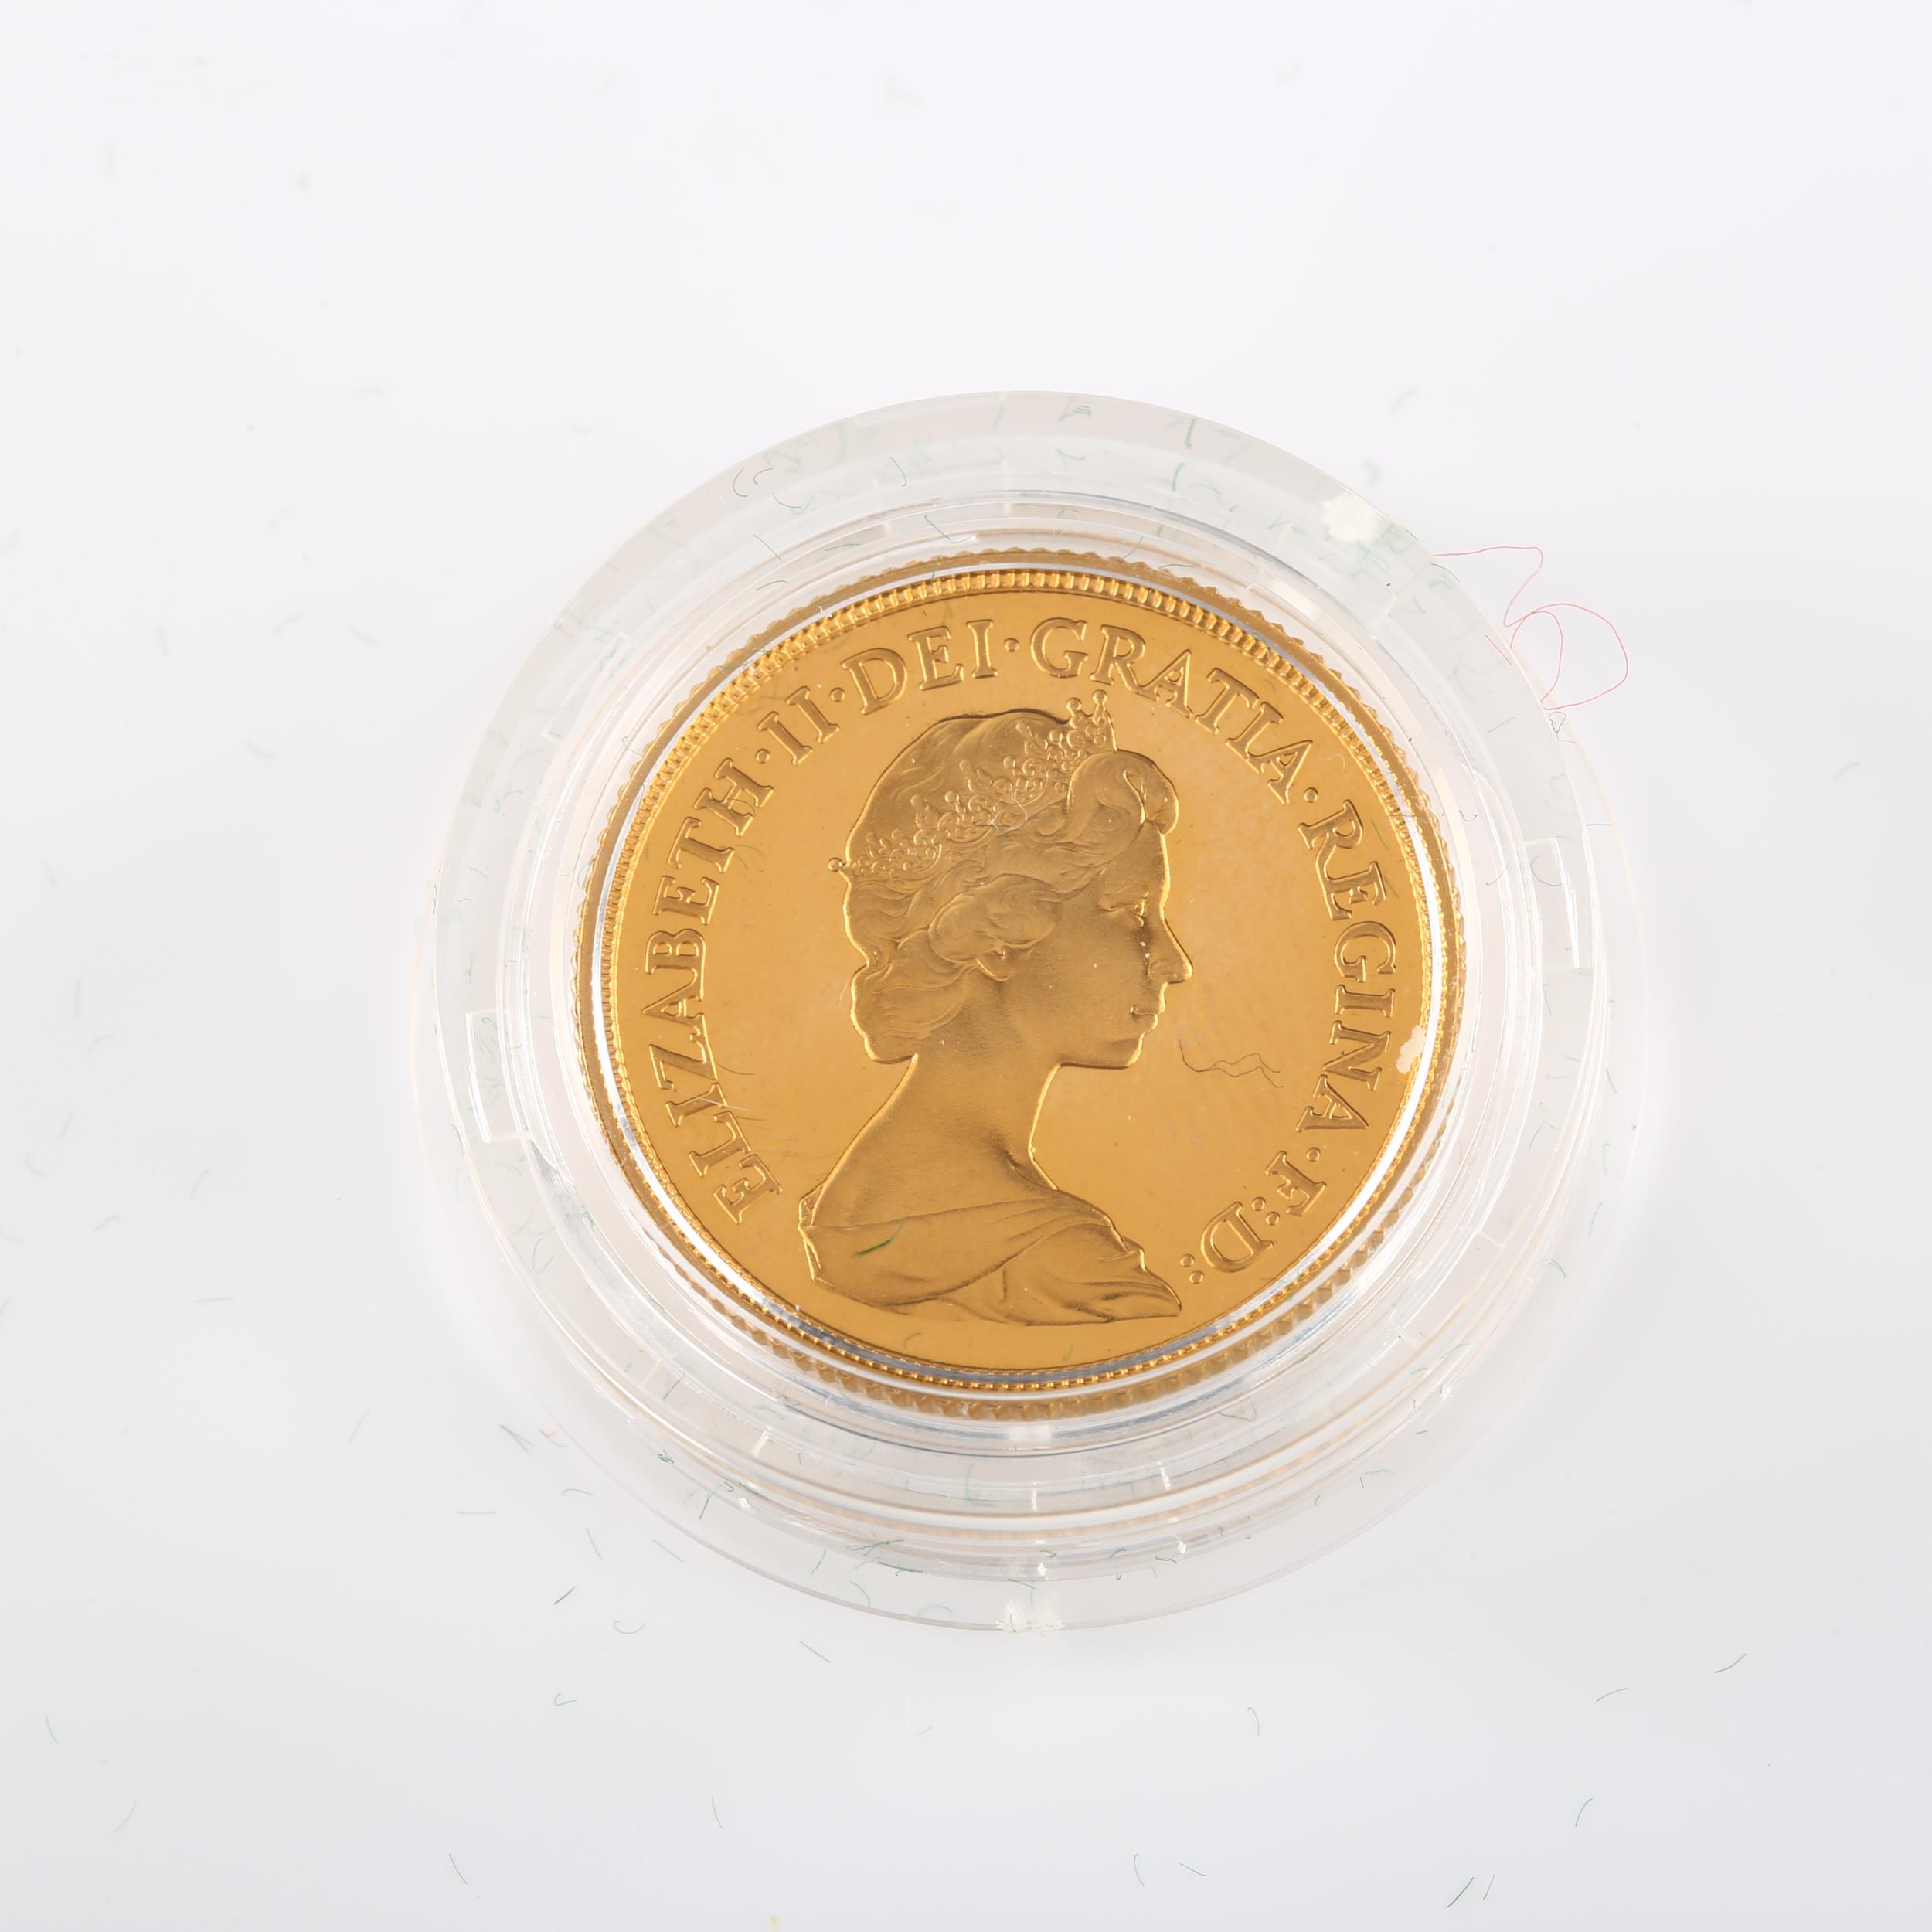 An Elizabeth II 1980 gold full proof full sovereign coin, Royal Mint, cased No damage - Image 3 of 4